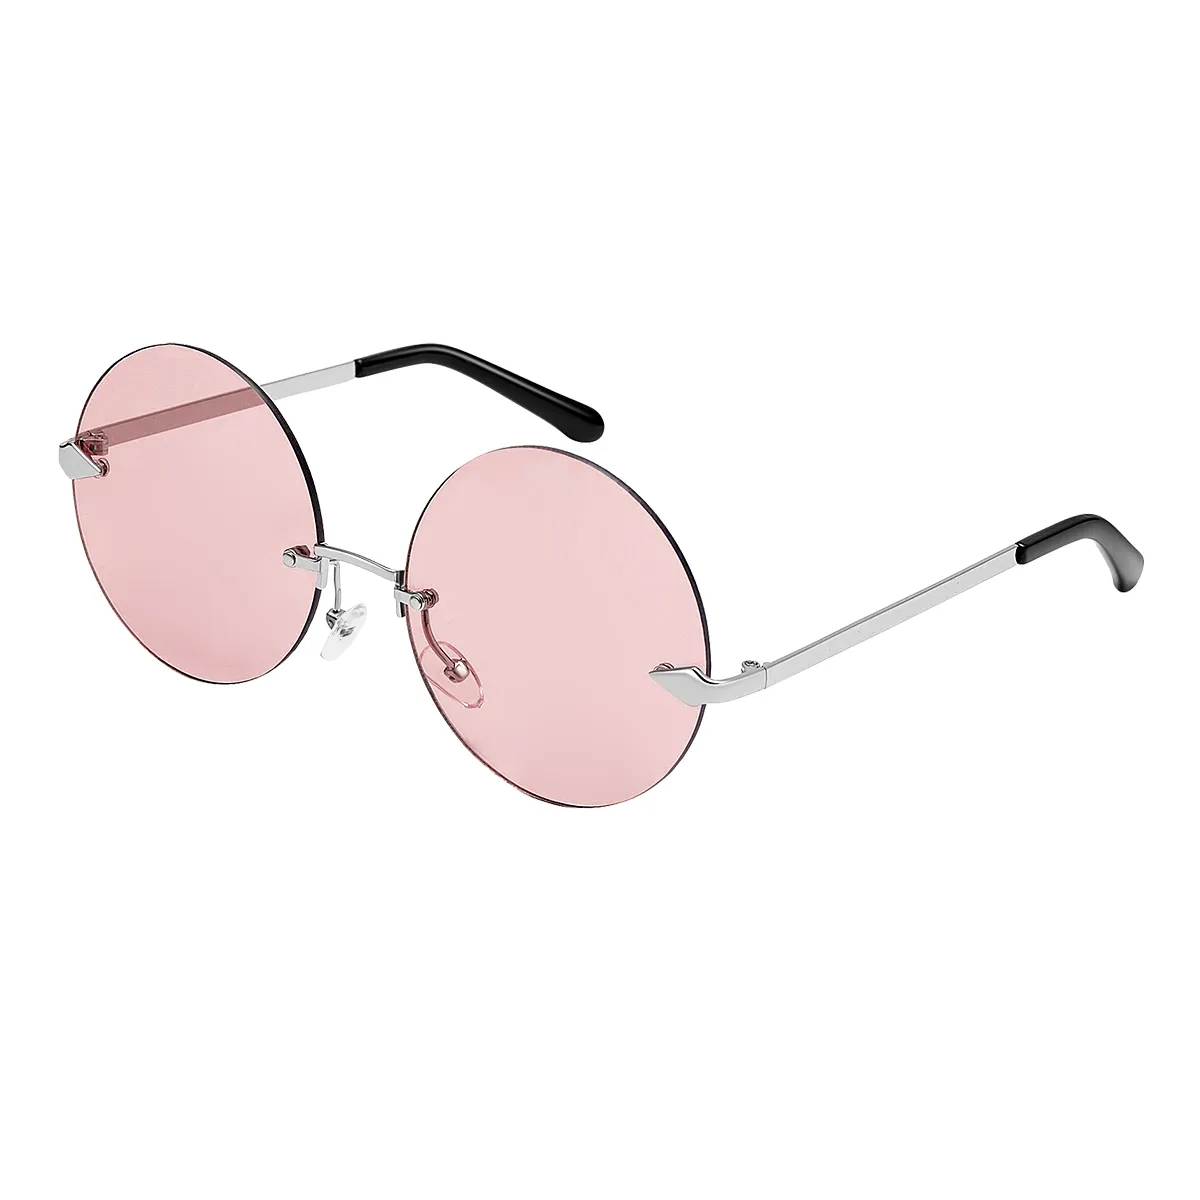 Gaines - Round Pink Sunglasses for Women